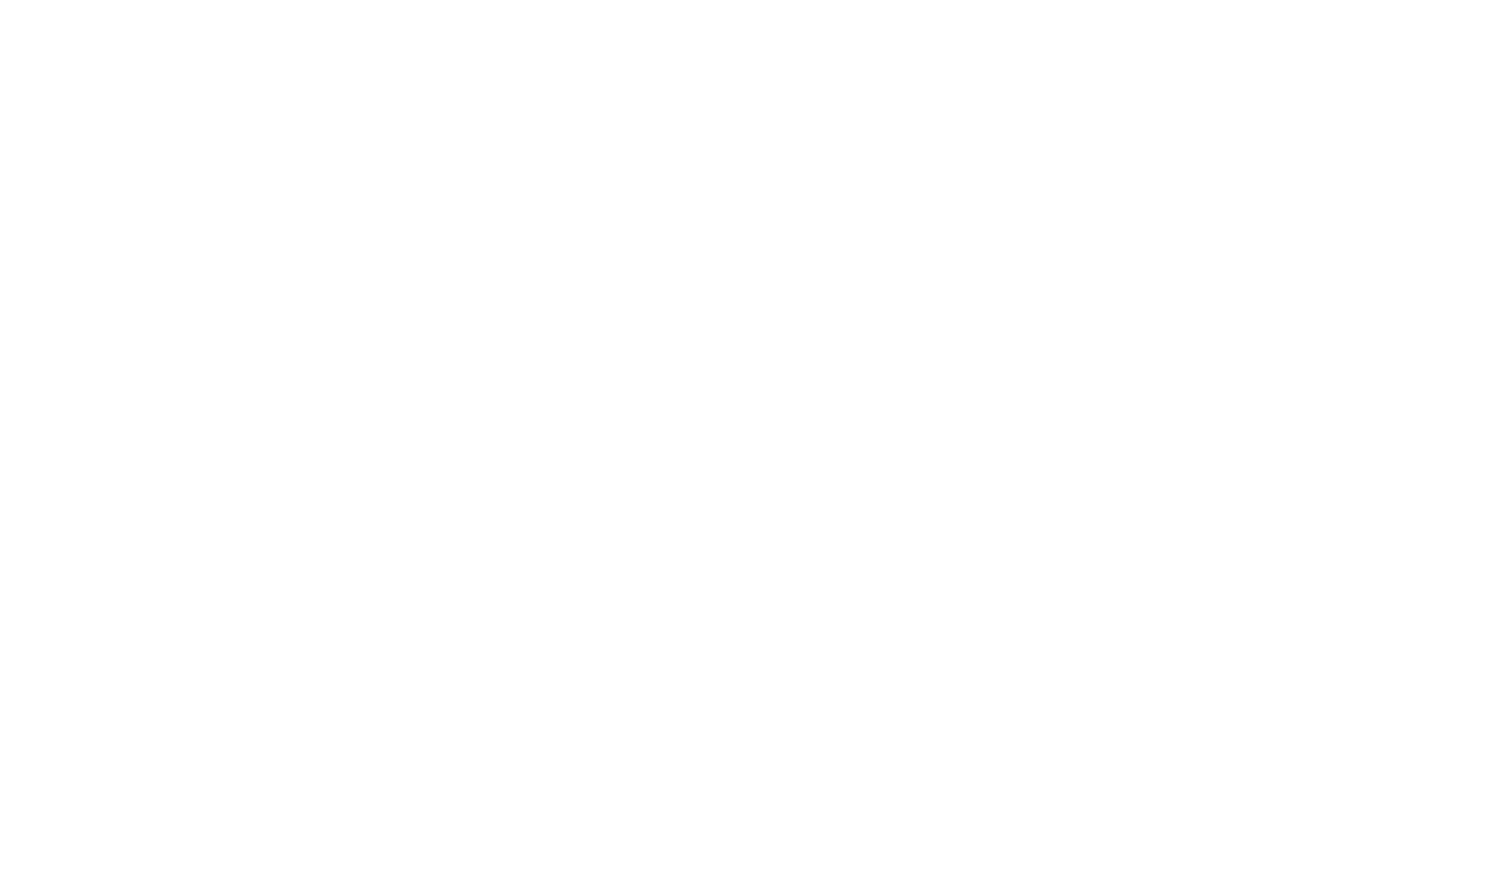 Mind in Brighton and Hove